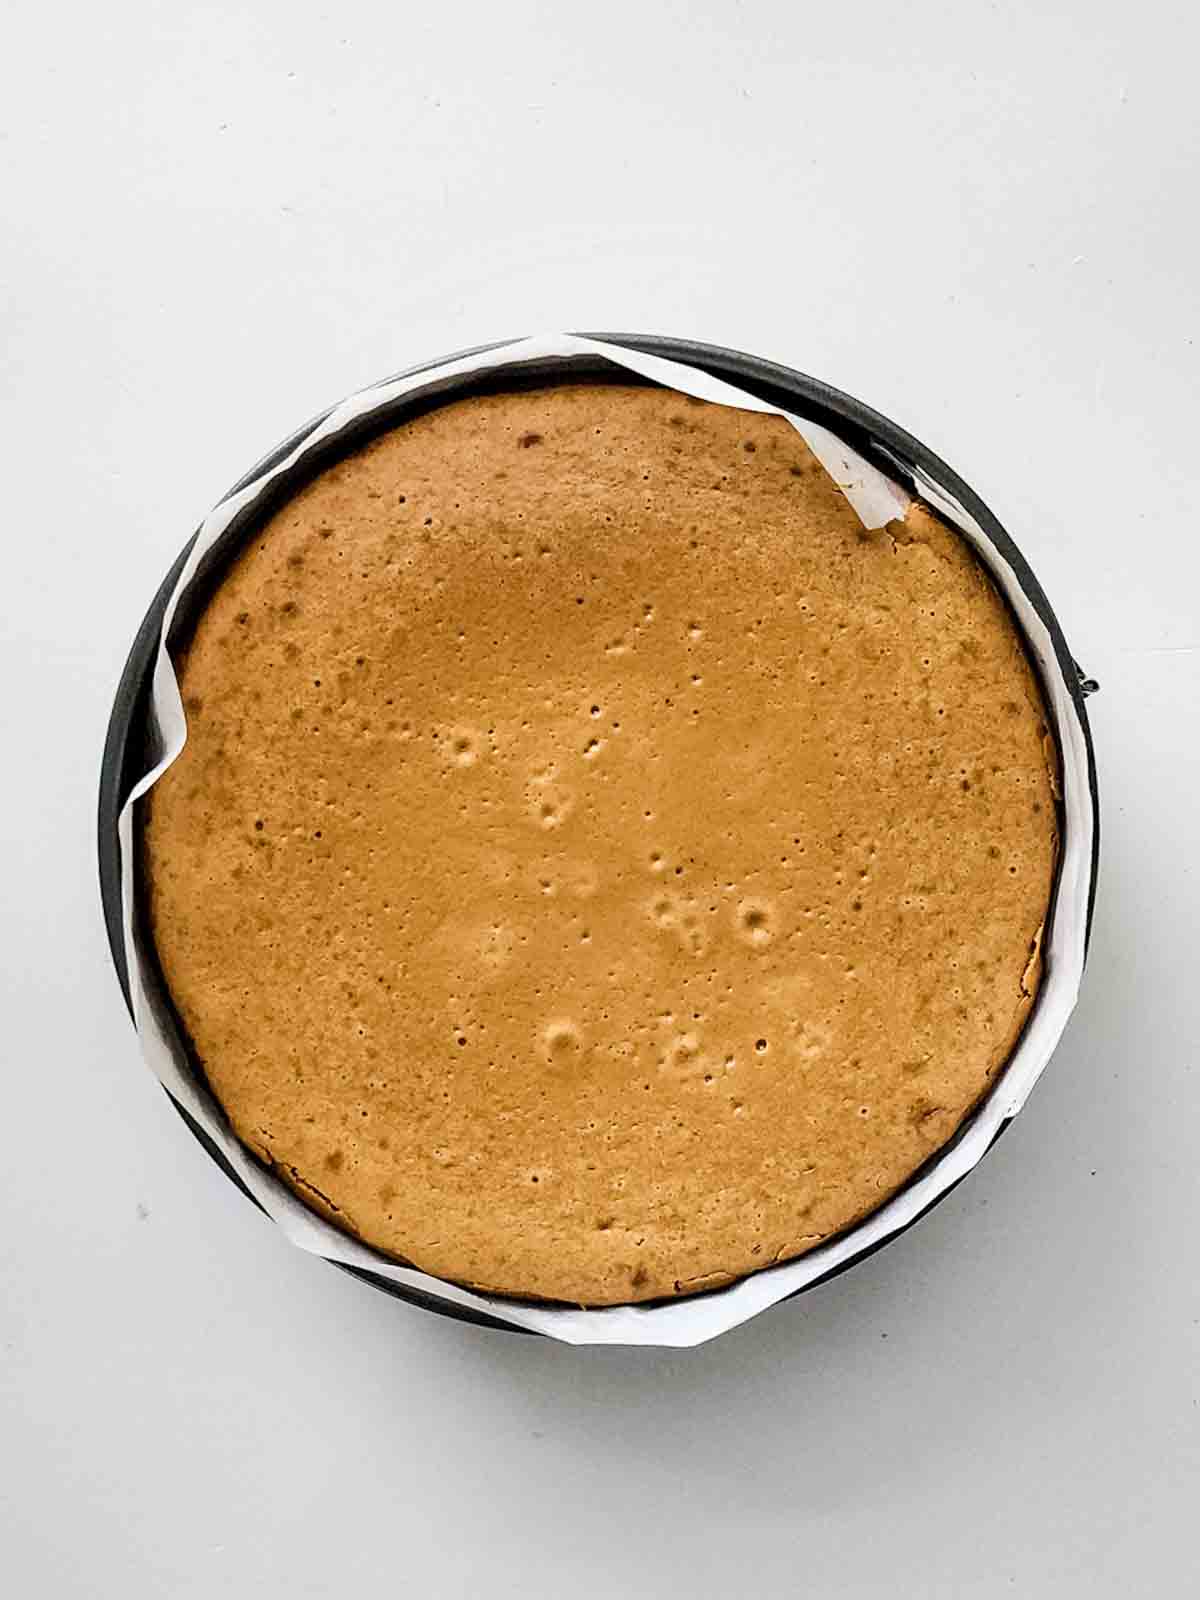 What the baked gingerbread cheesecake looks like fresh out of the oven.